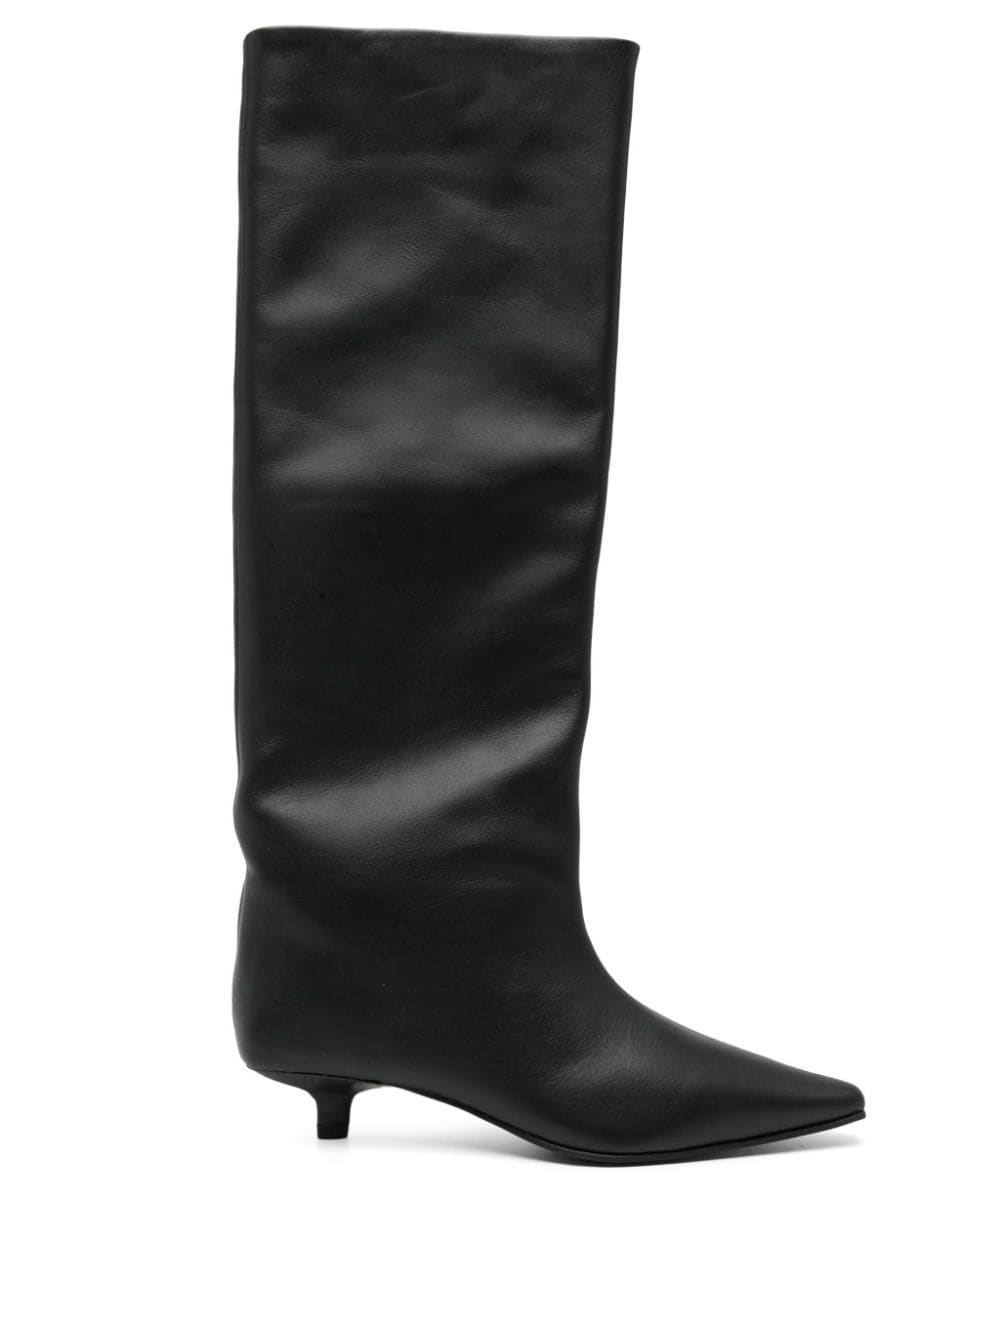 Fizz 40mm calf-length leather boots